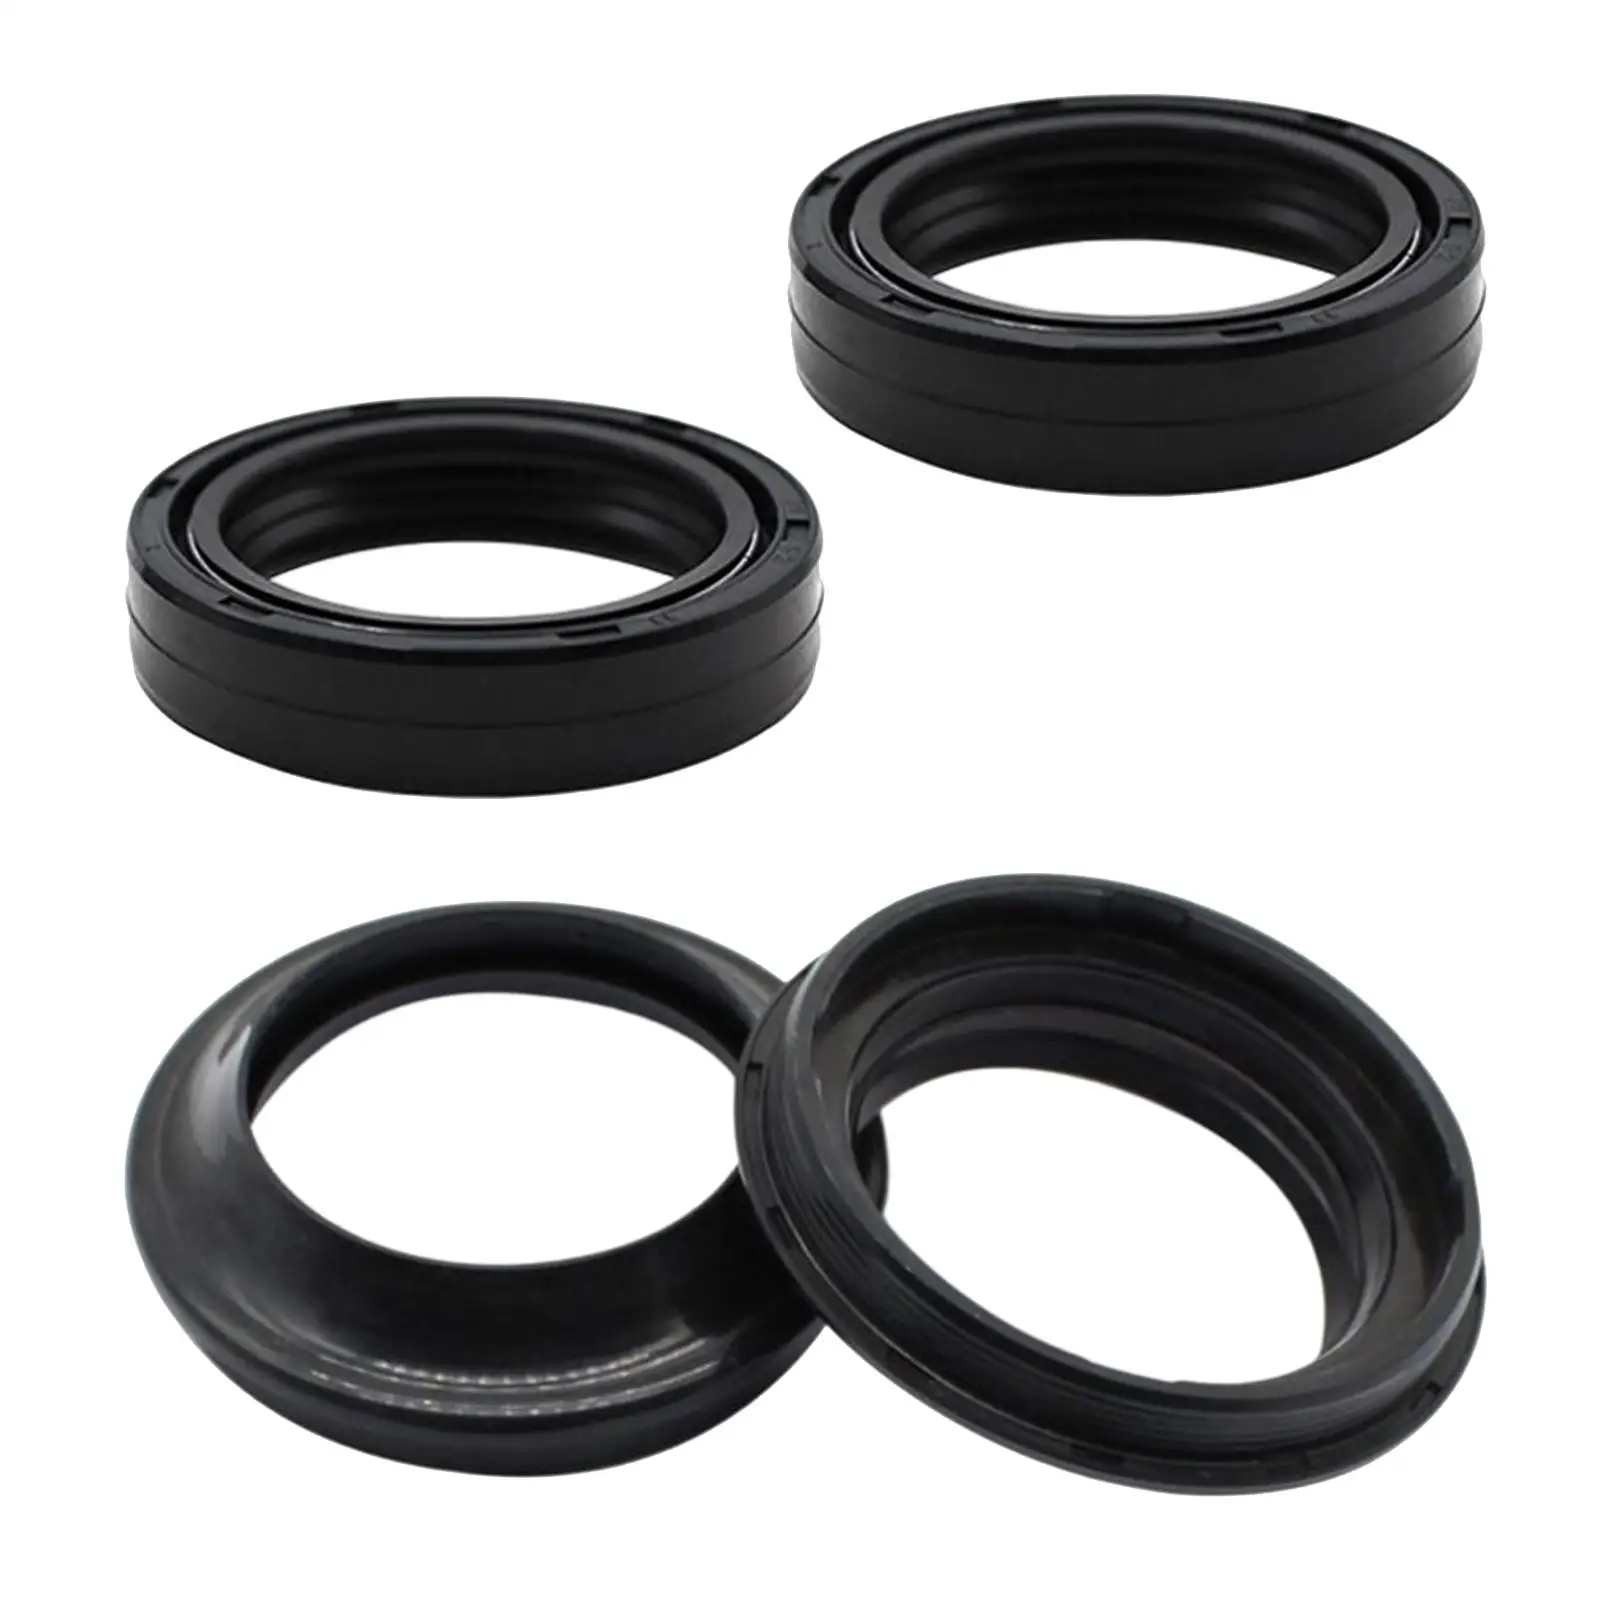 Motorcycle Fork Seal and Dust Seal Kit 49x60x10mm for Kawasaki Klx400 VN2000 RM250